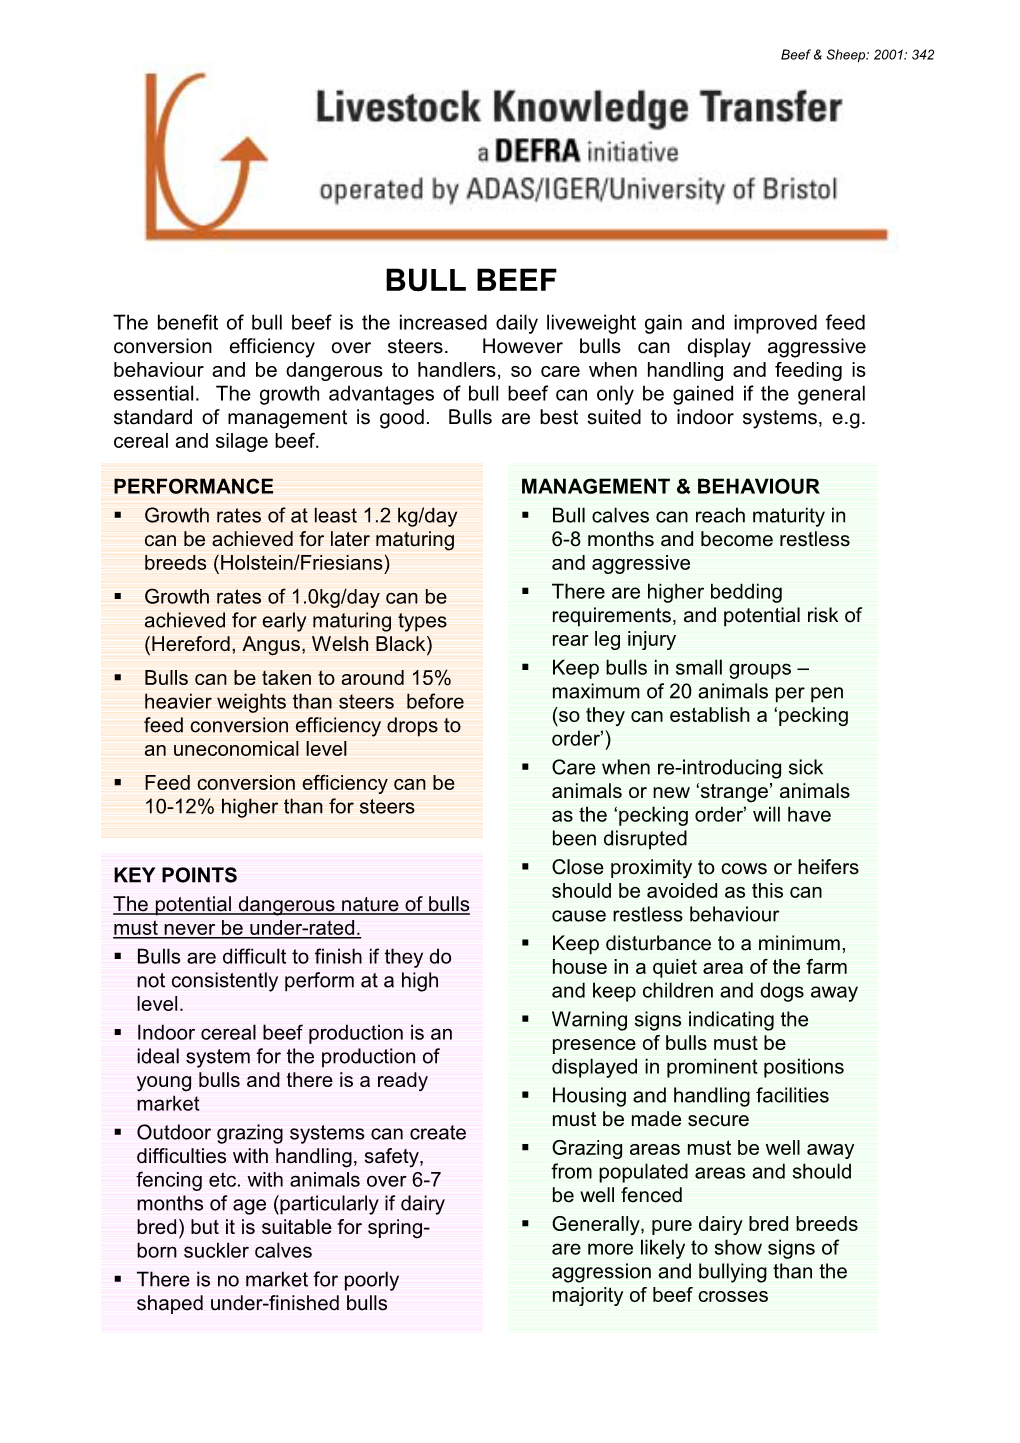 BULL BEEF the Benefit of Bull Beef Is the Increased Daily Liveweight Gain and Improved Feed Conversion Efficiency Over Steers